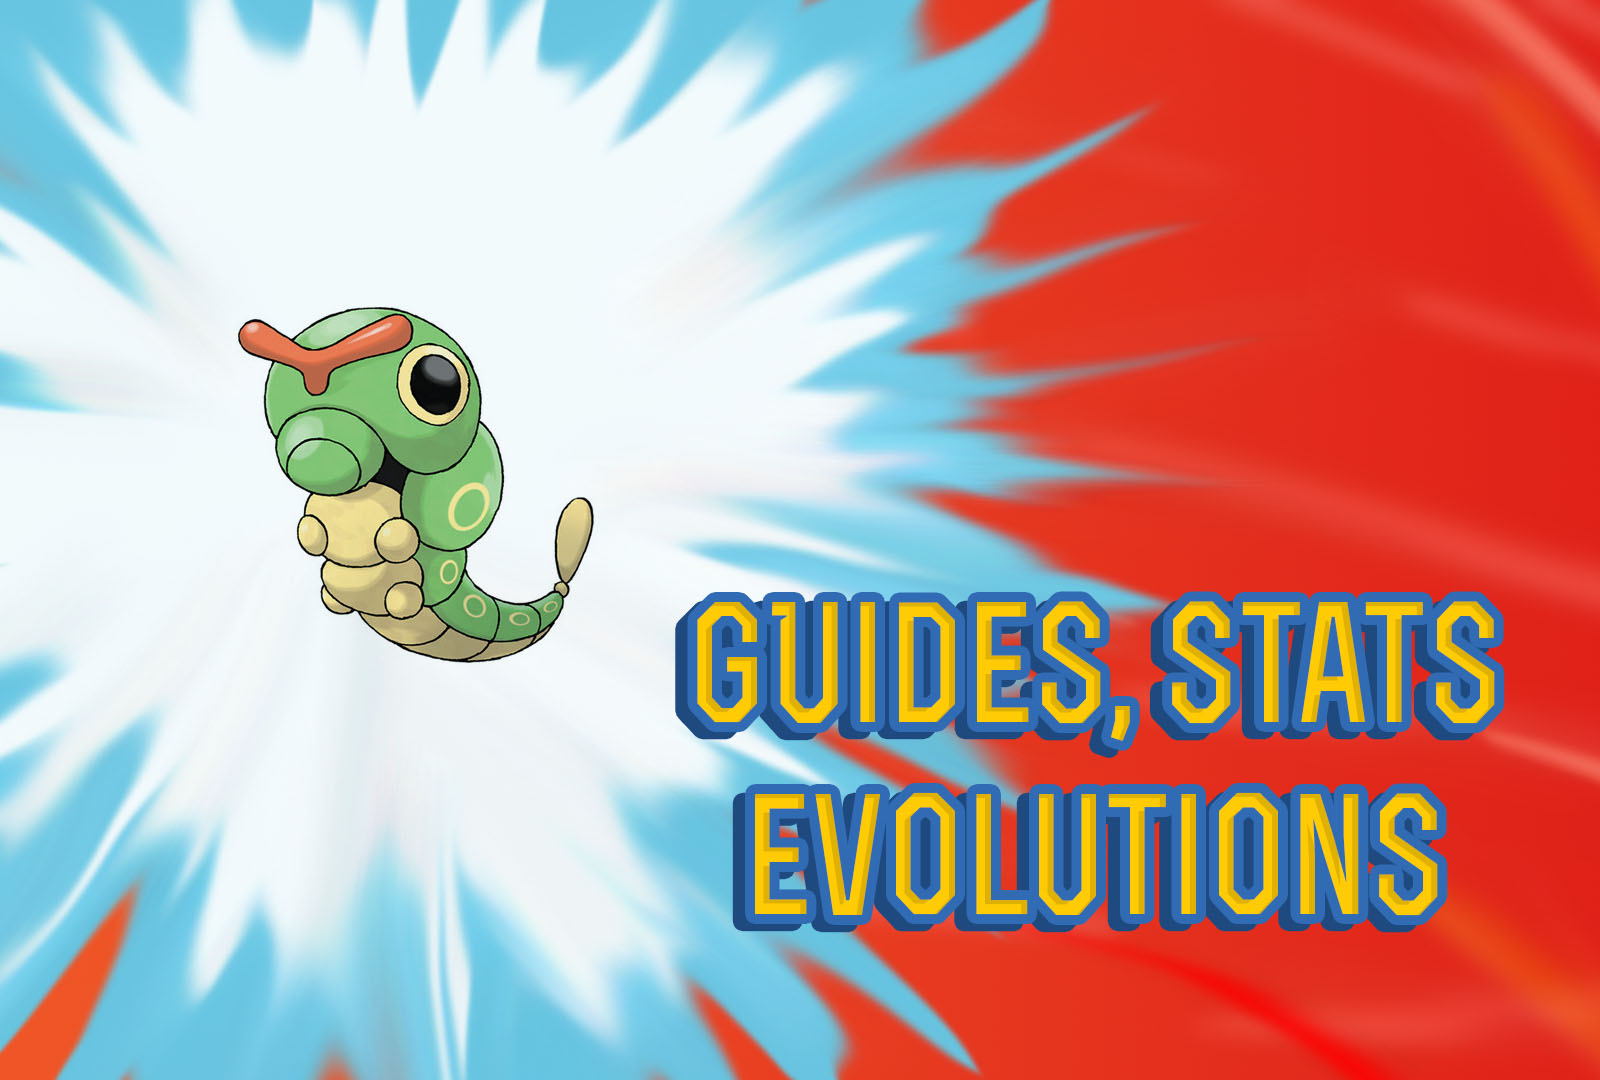 Pokemon Lets Go Caterpie Guide, Stats & Evolutions